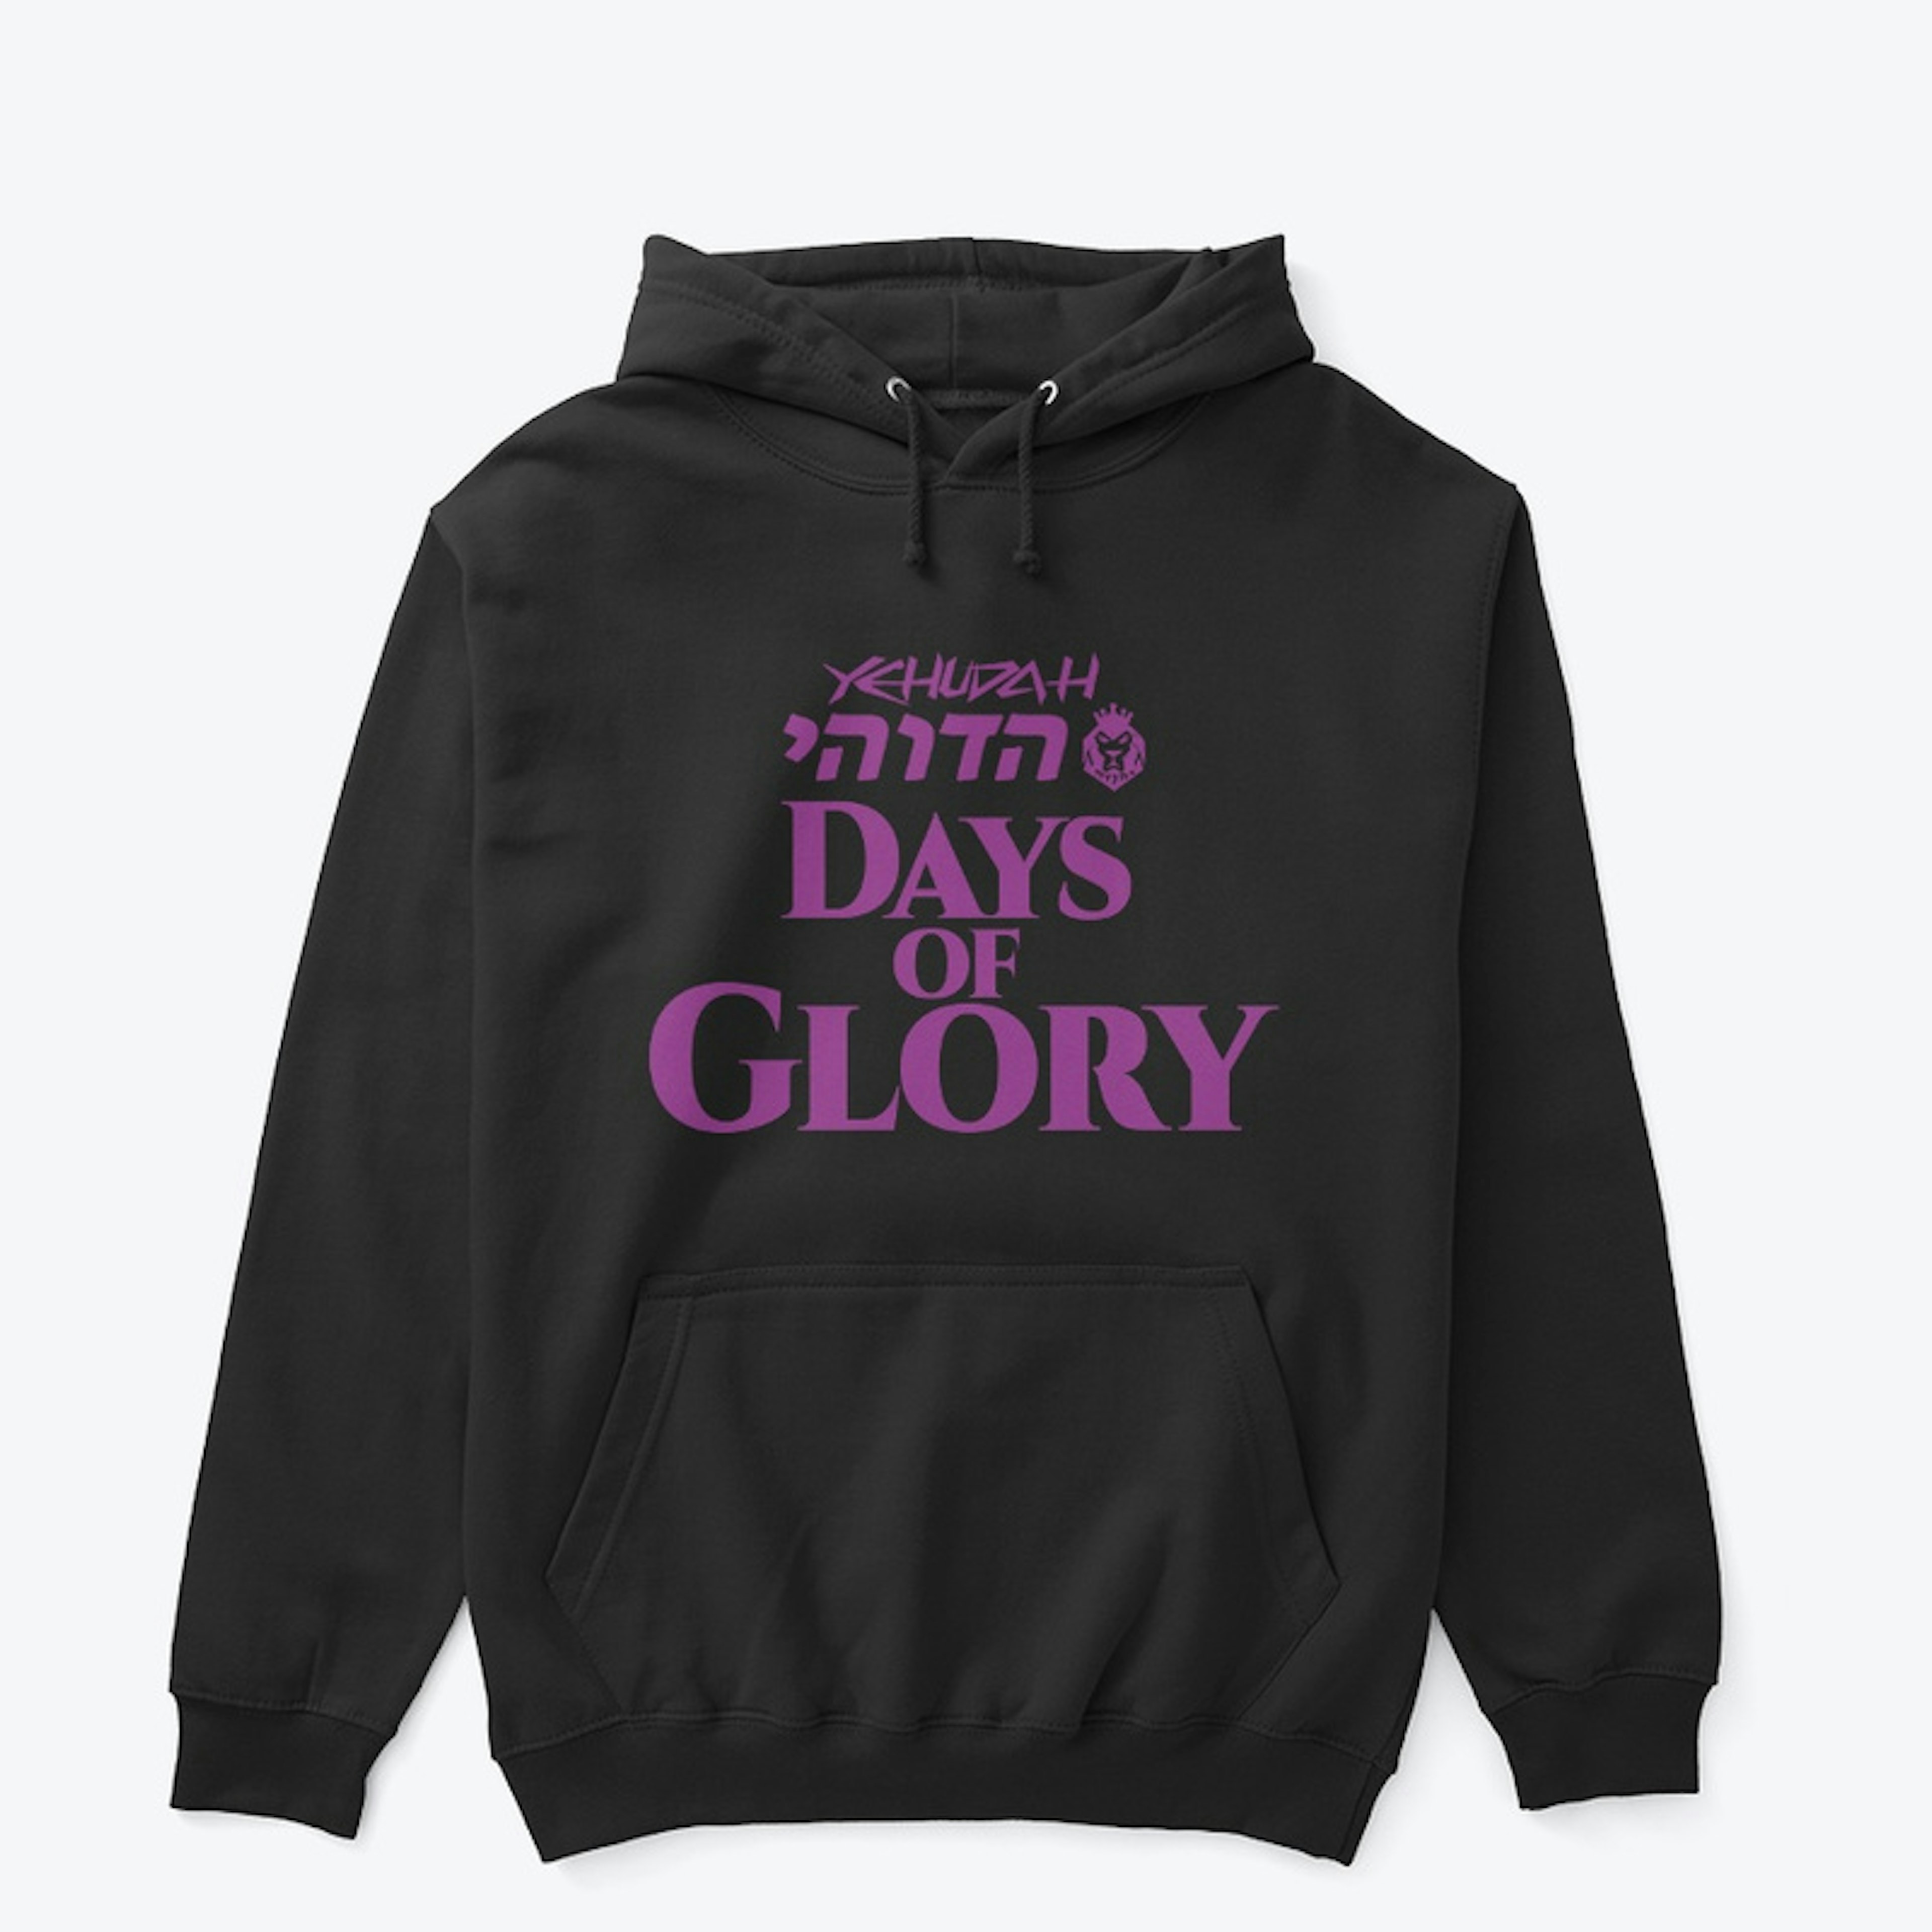 Days of Glory [Collection]